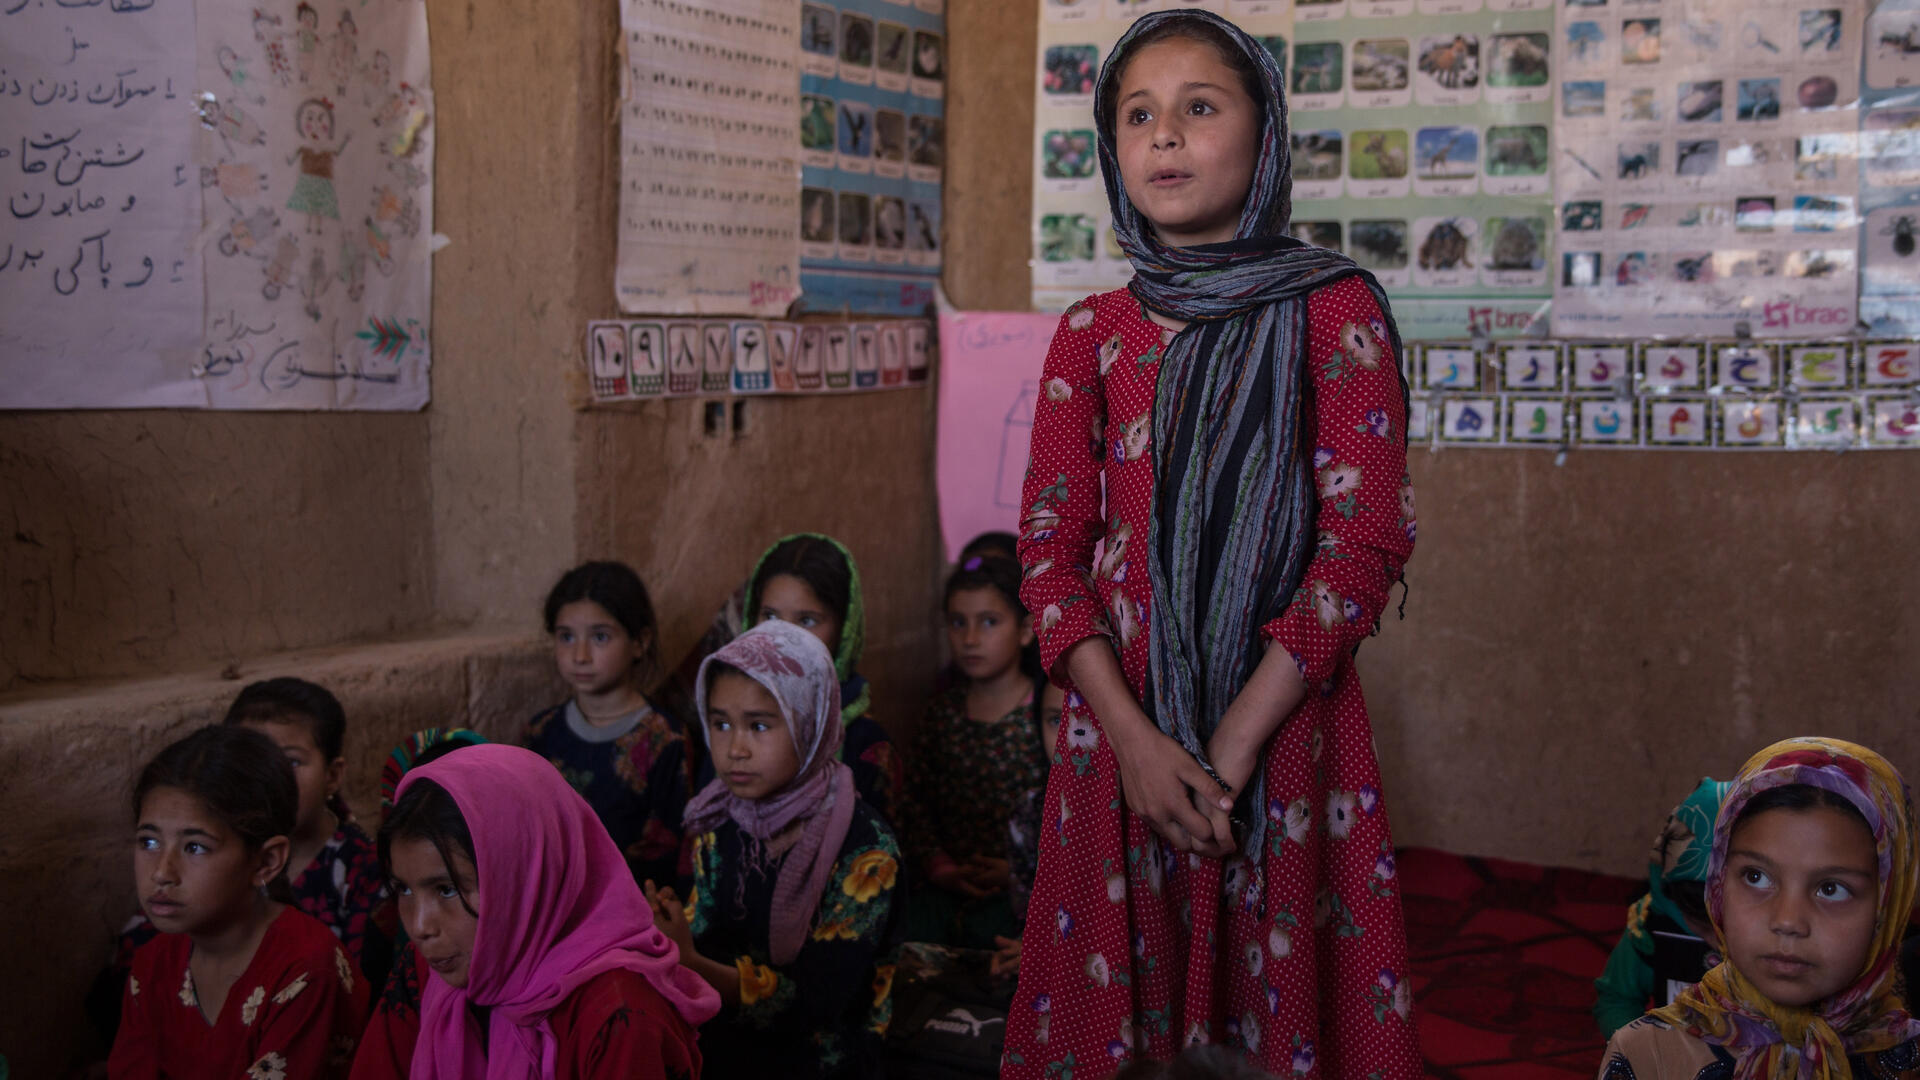 A young girl stands to speak, hands clasped, in a classroom in Afghanistan.